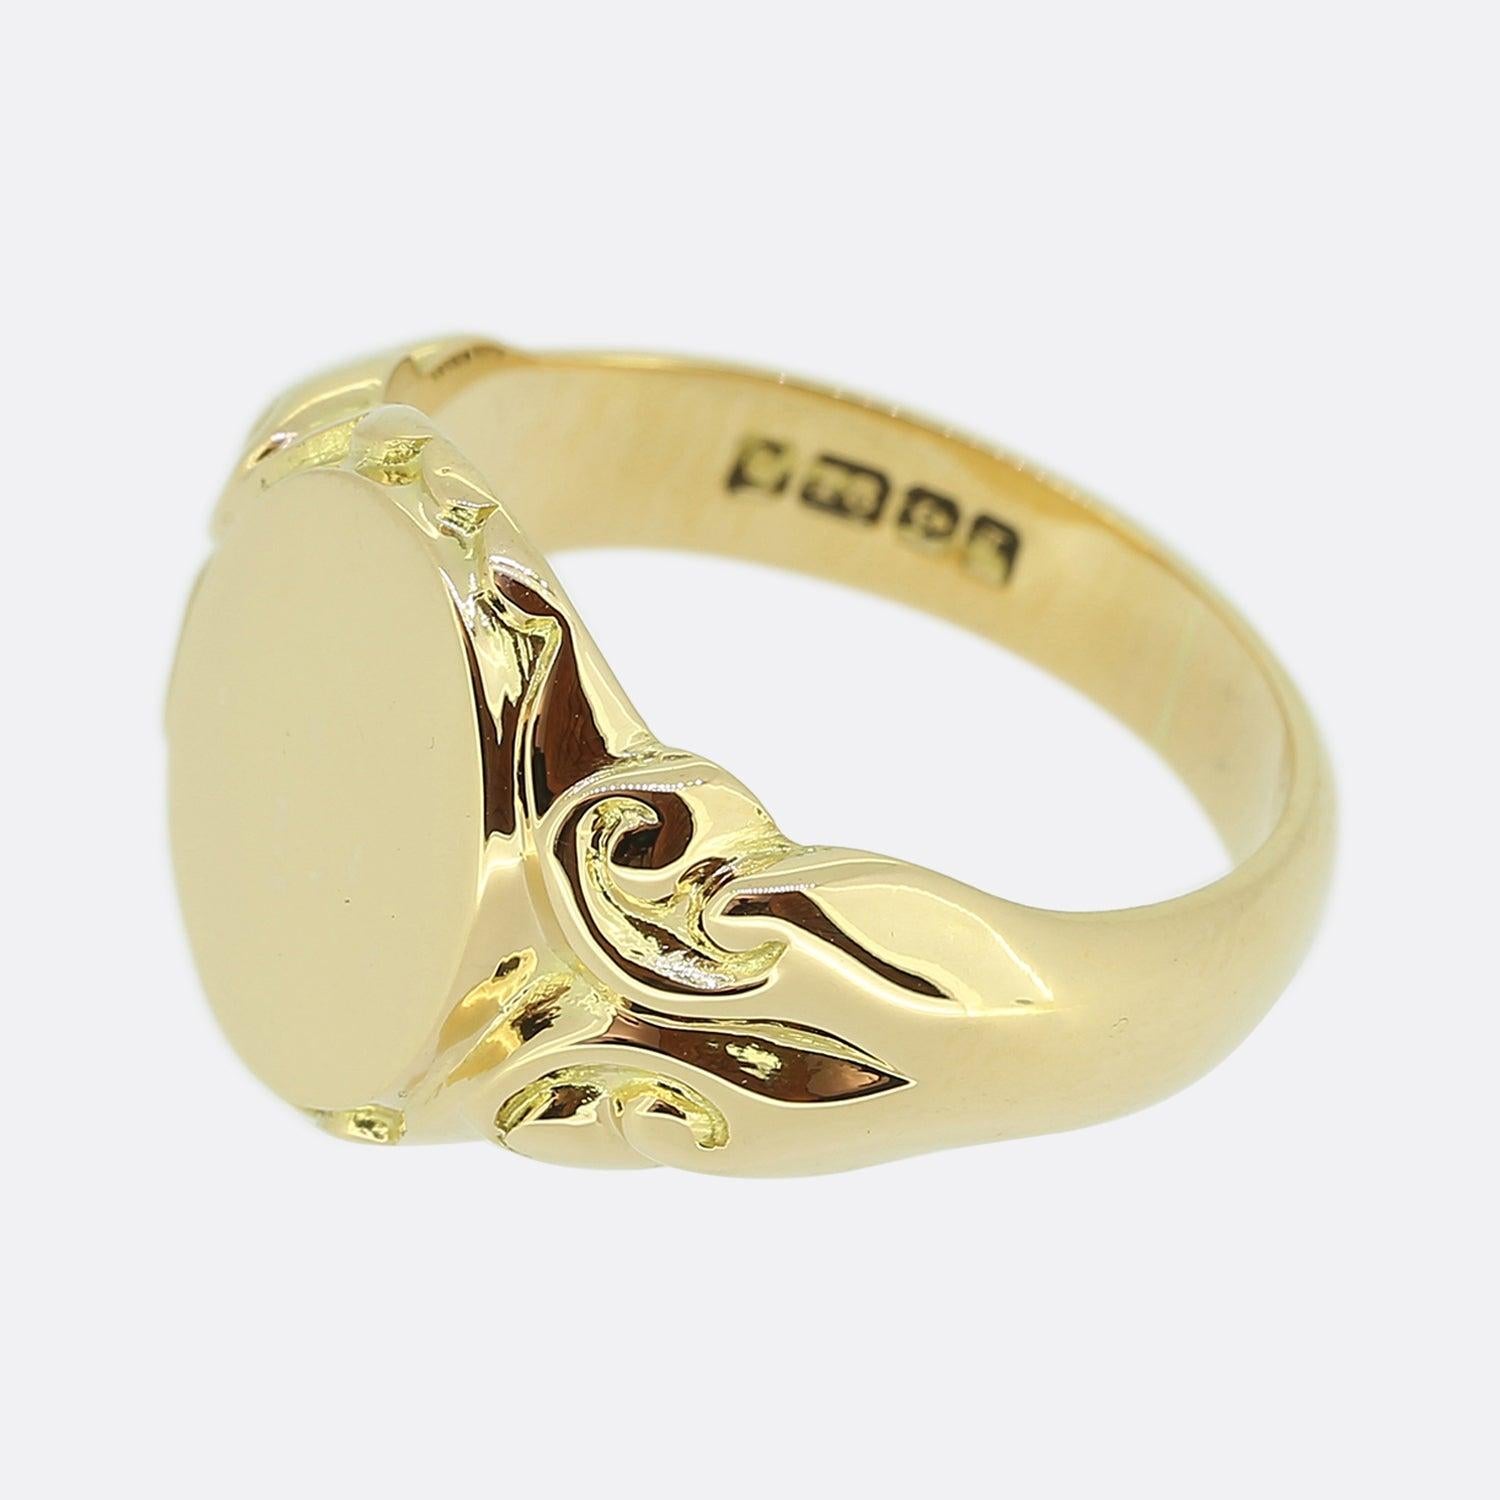 Here we have a vintage 18ct yellow gold signet ring that is fully hallmarked to the 1993. The ring features a plain polished face with wide scrolled shoulders providing a strong presence on the finger. 

Condition: Used (Very Good)
Weight: 12.0